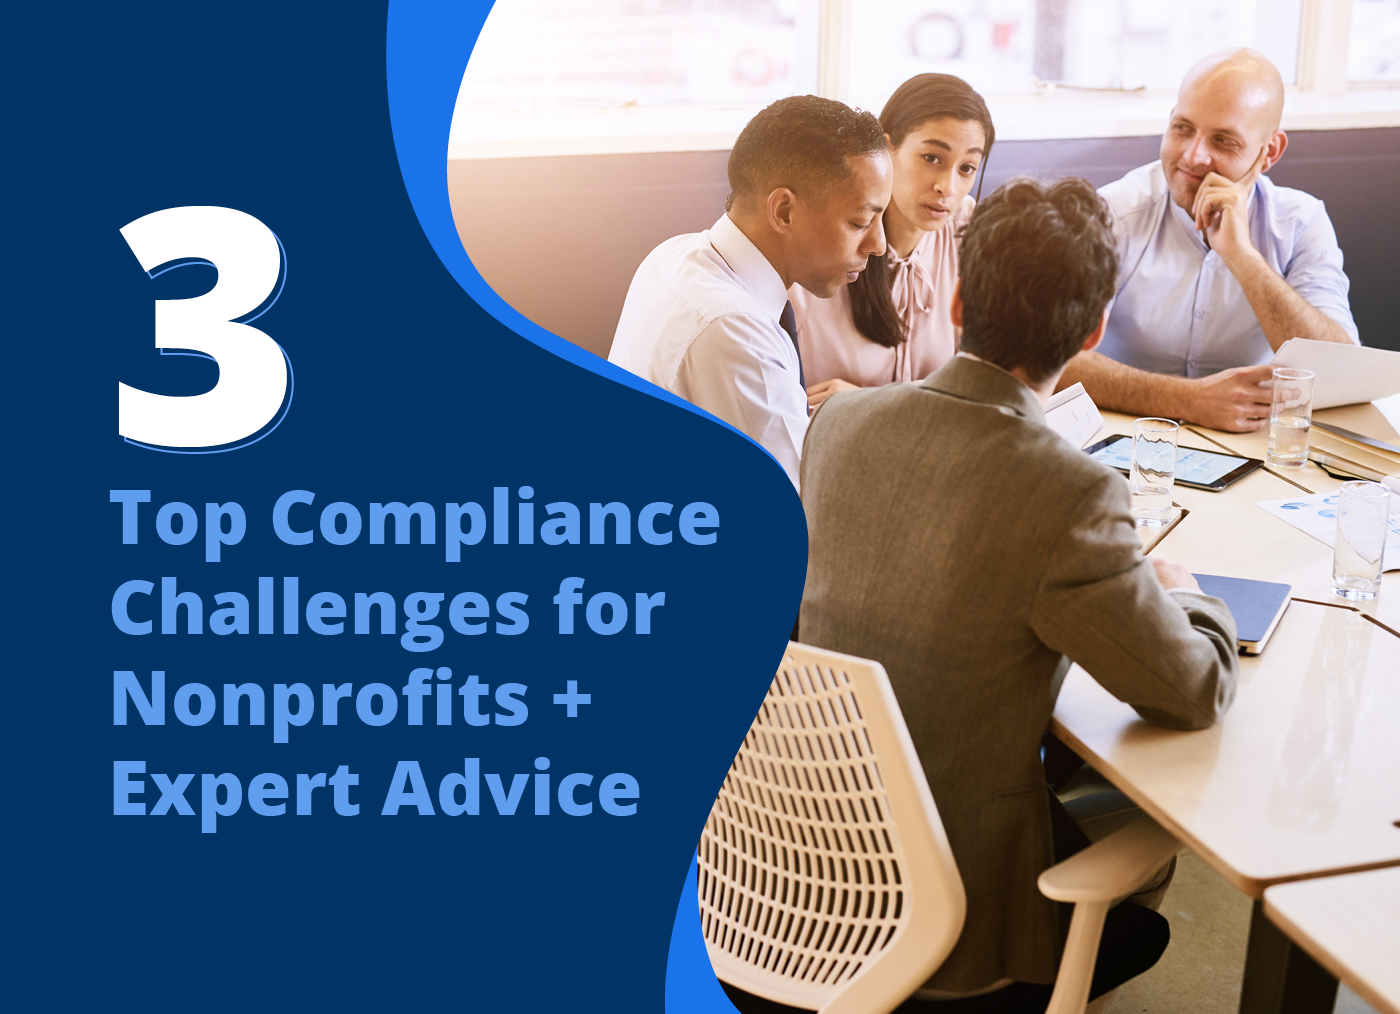 This guide reviews the three compliance challenges that nonprofits face and expert advice for approaching these issues.]